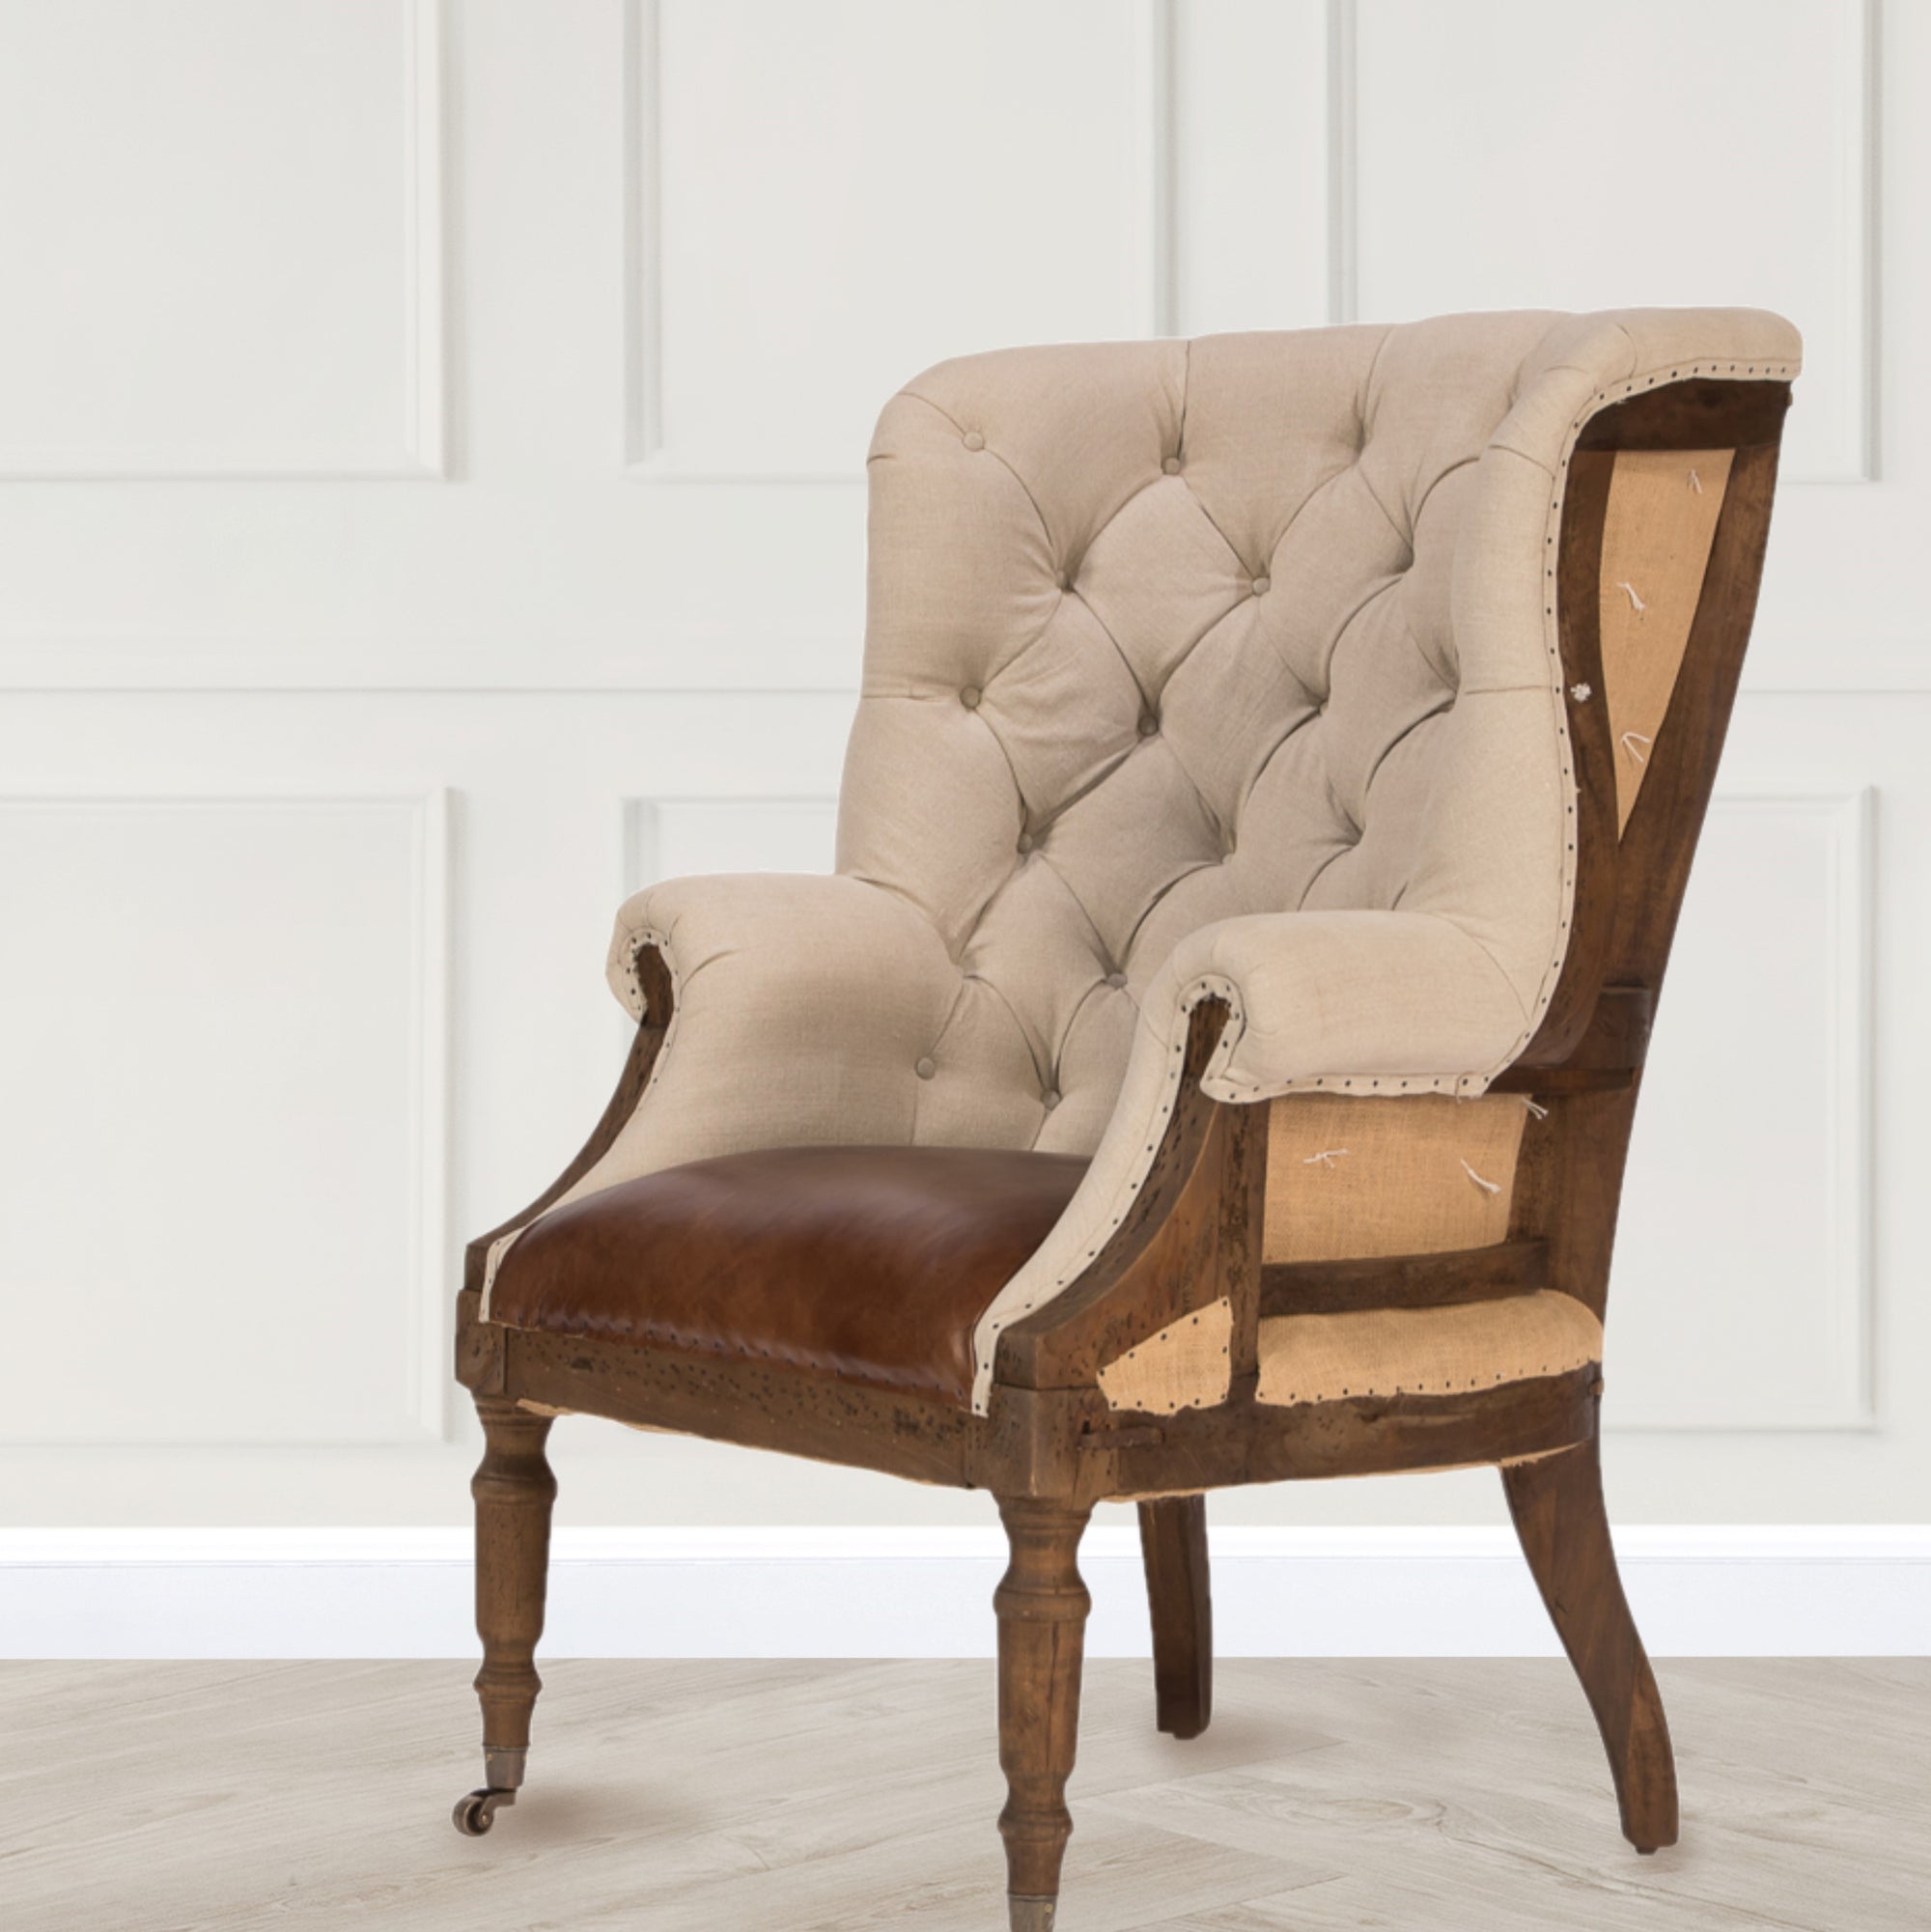 Restoration Hardware Deconstructed Tufted Welsh Chair, Restoration Hardware Deconstructed English Rolled Arm Chair